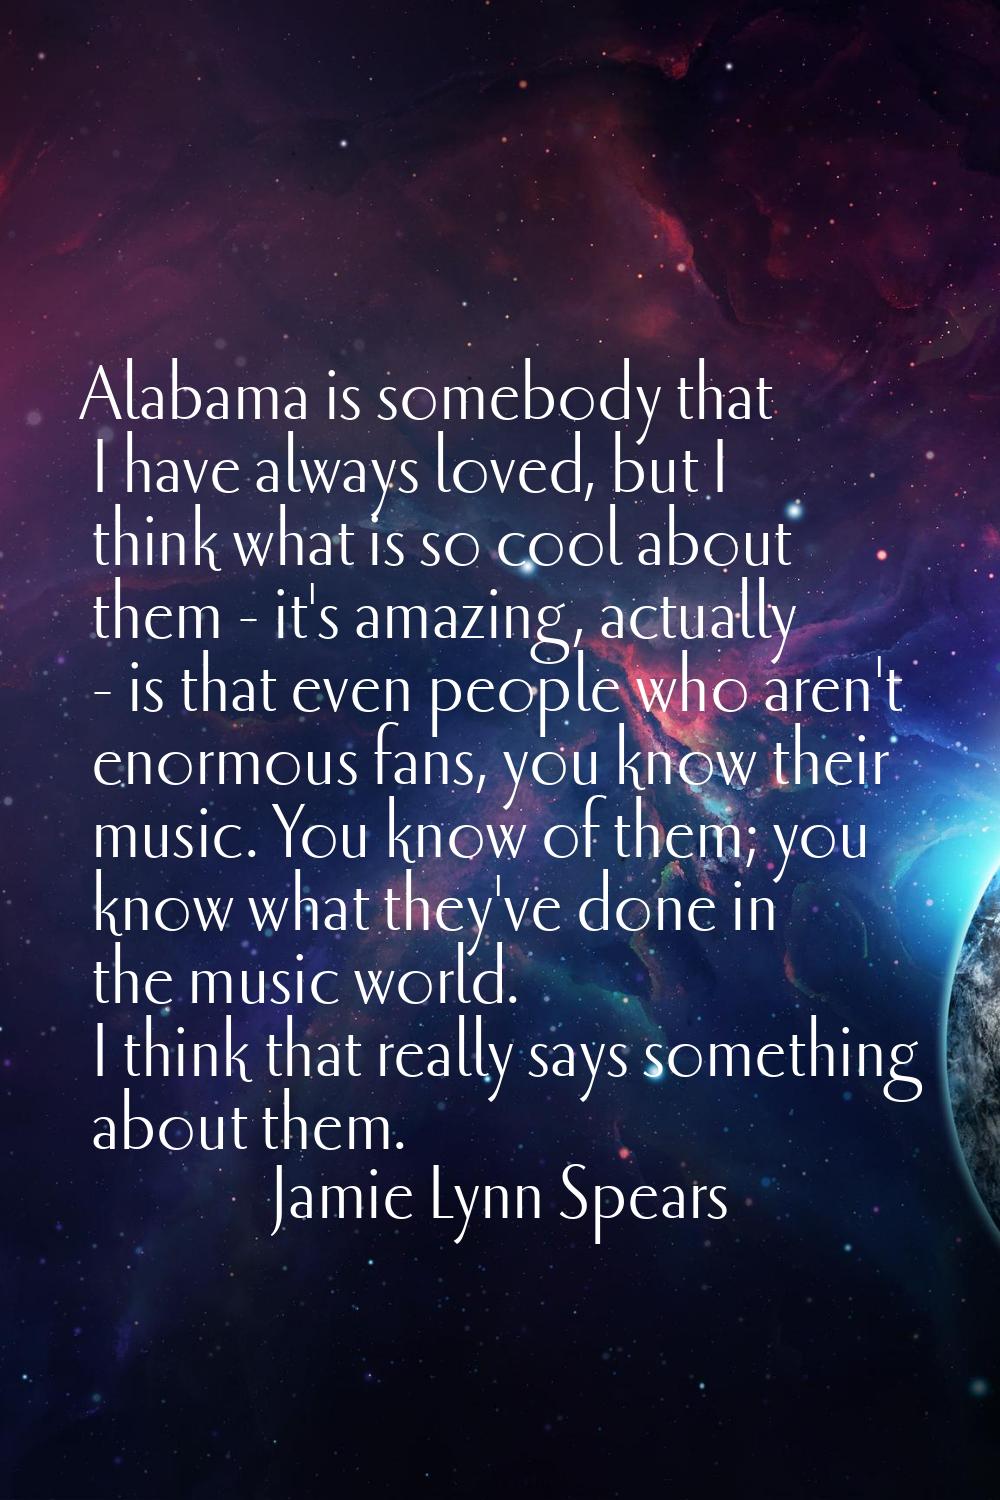 Alabama is somebody that I have always loved, but I think what is so cool about them - it's amazing